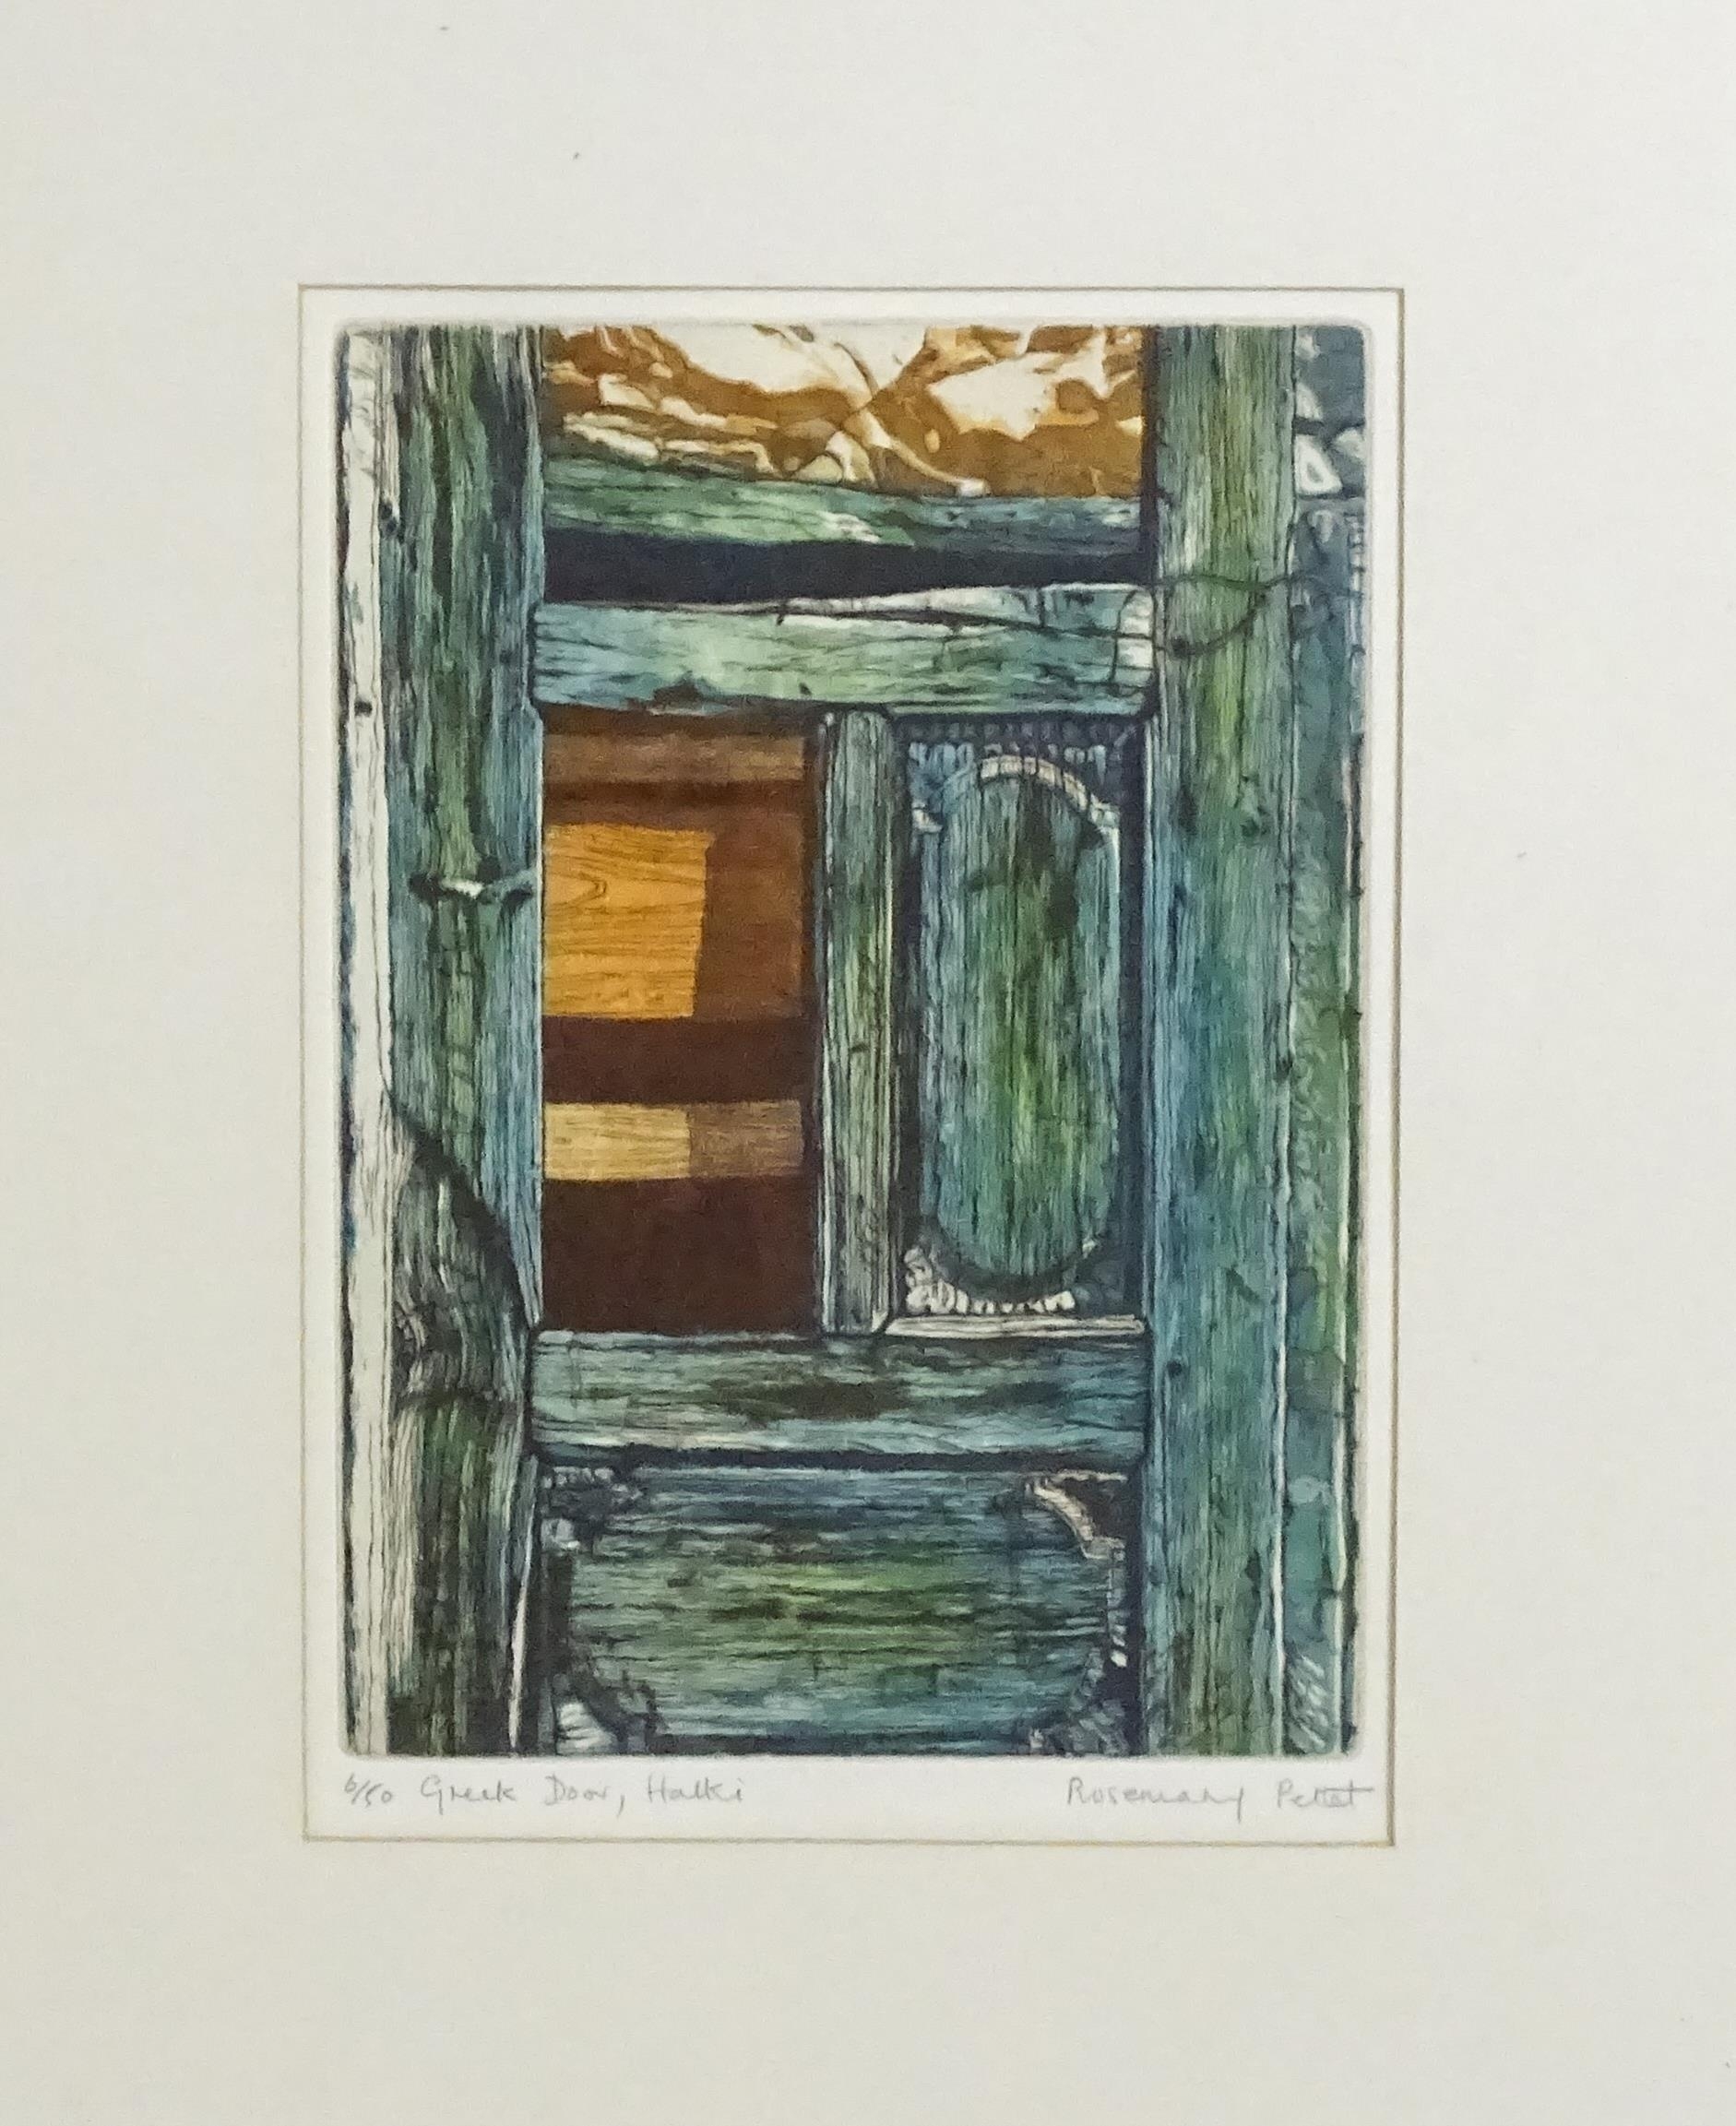 Rosemary Pettet, 20th century, Limited edition colour etching, Greek Door, Halki. Signed, titled and - Image 3 of 5